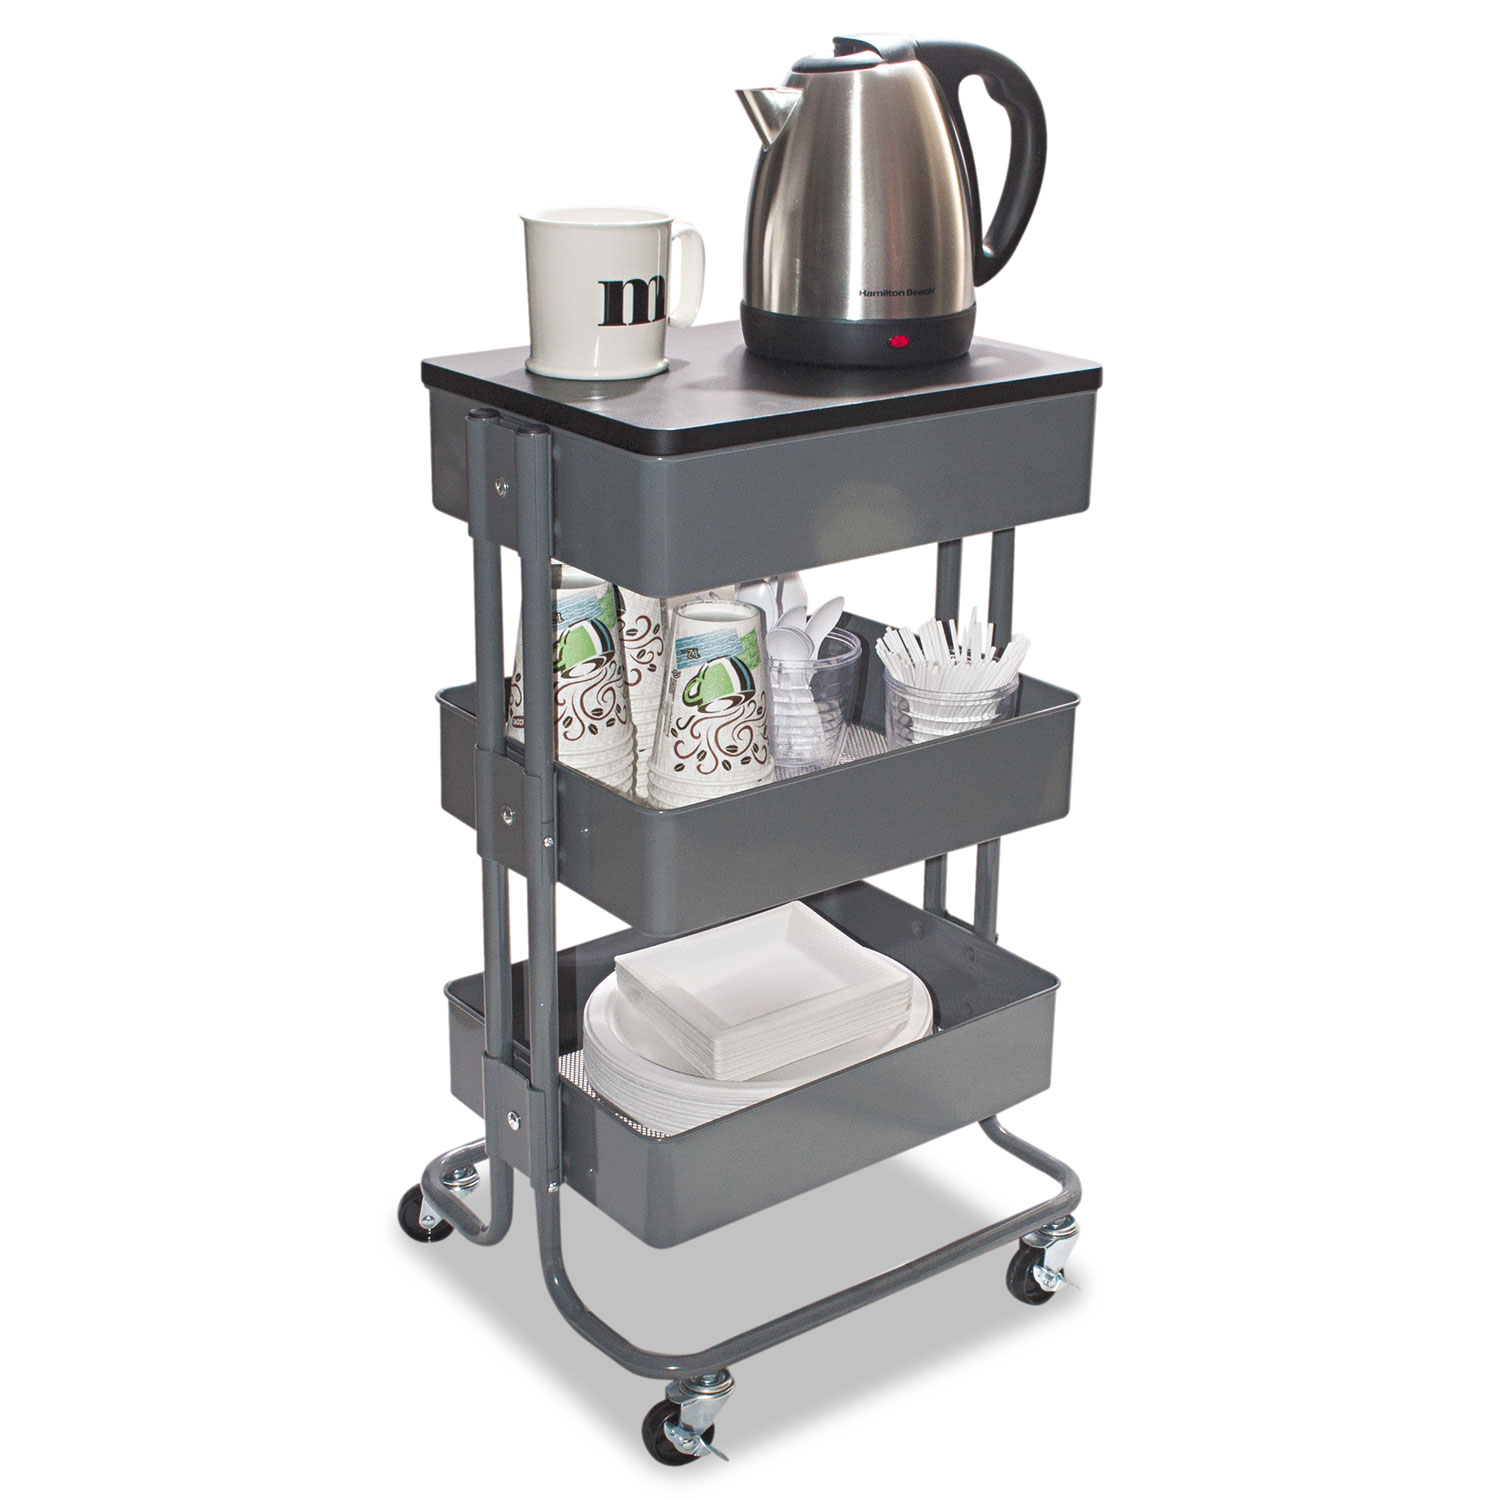 Multi-Use Storage Cart/Stand-Up Workstation, 13.9w x 11.75d x 18.5-39.5h, Gray